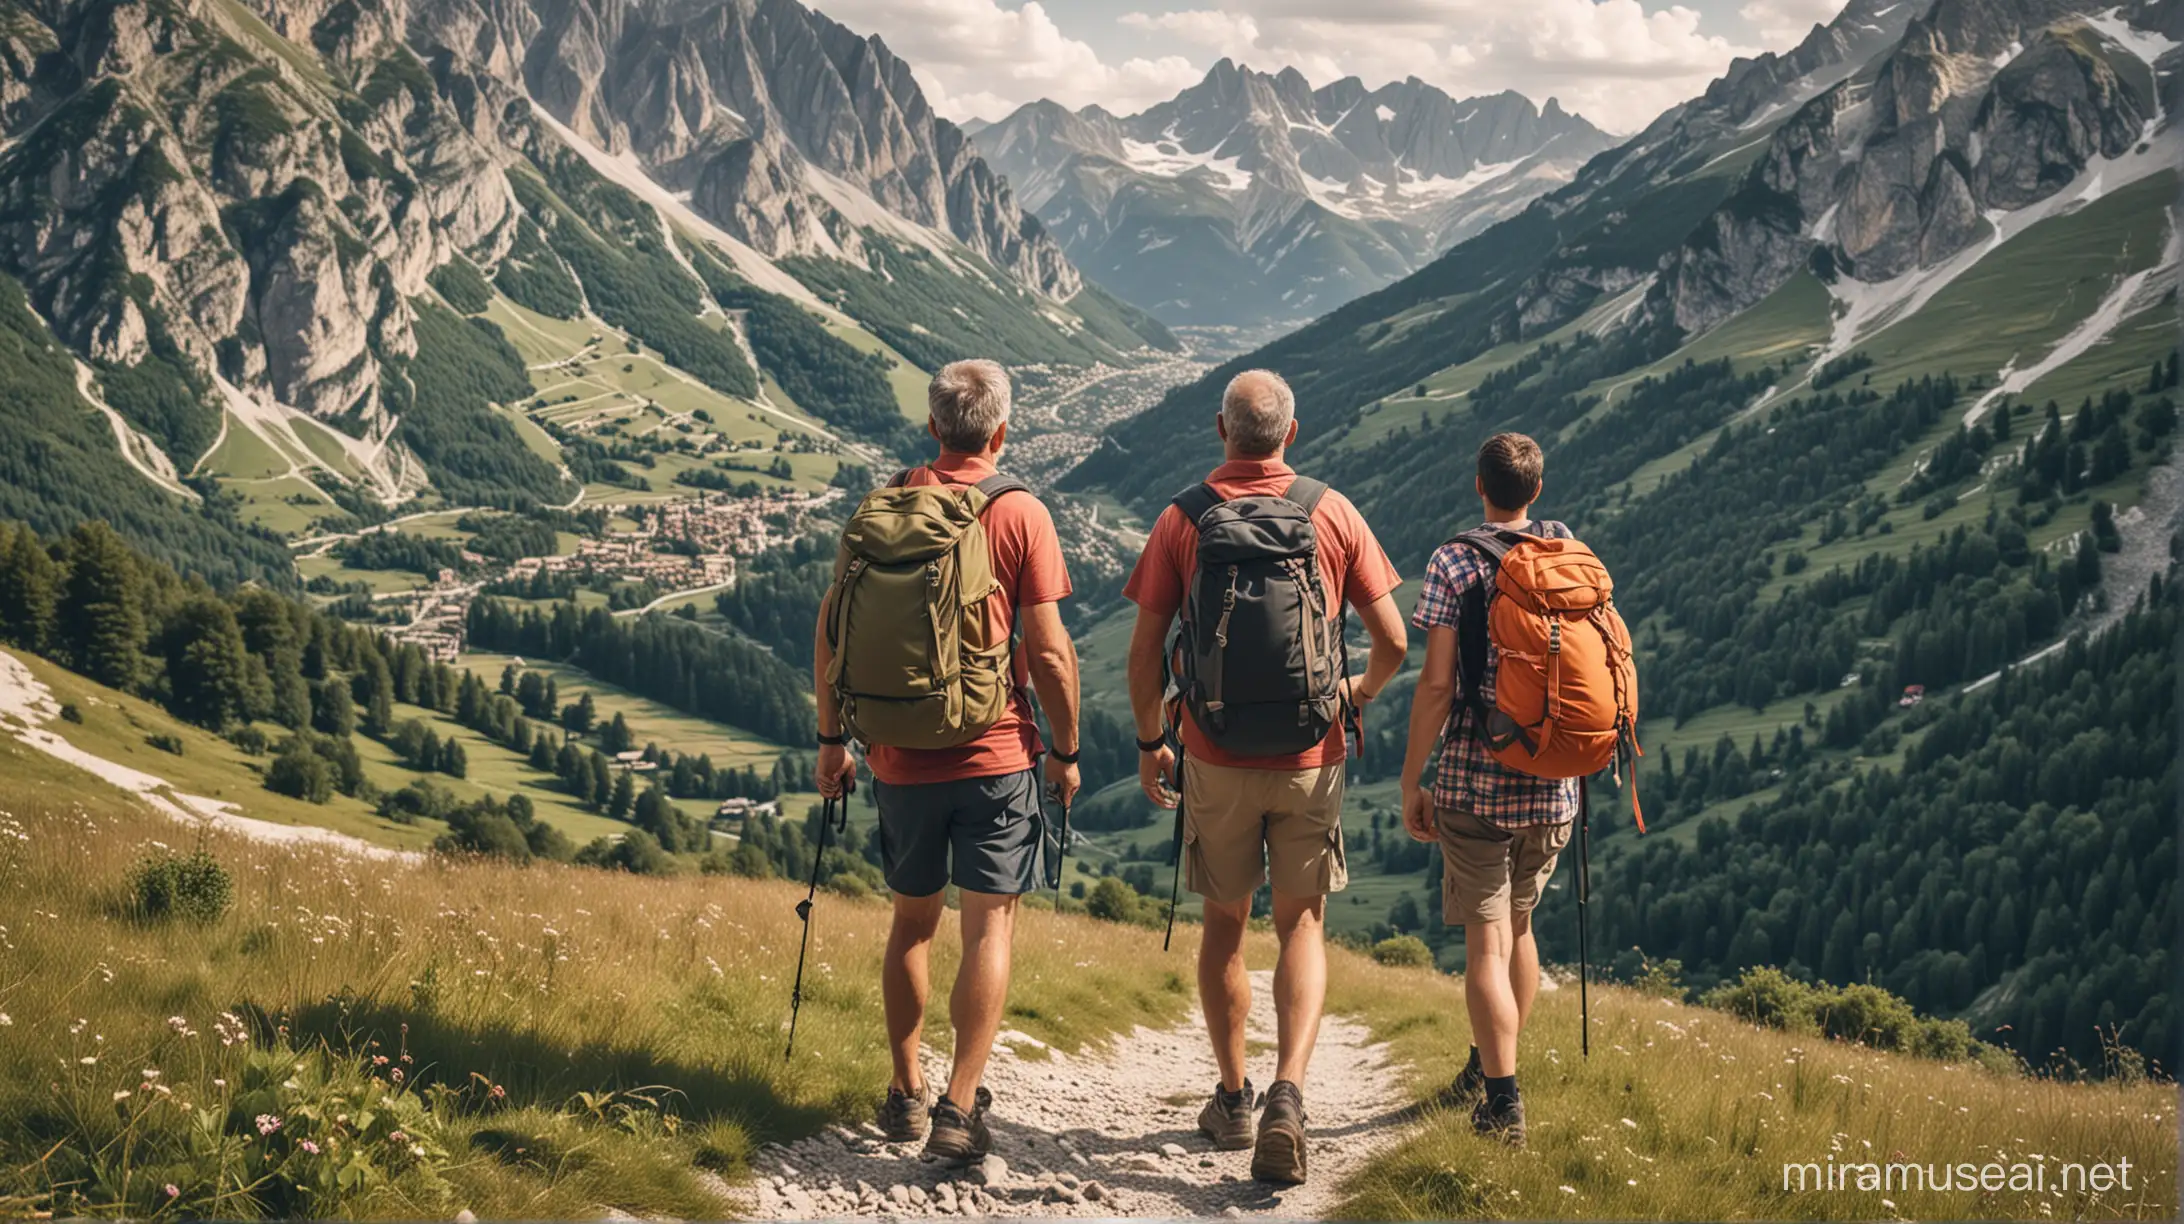 three kids in their 20s and their dad in their 60s, hiking for days through the italian alps, carrying big bag-packs and wearing funny clothes